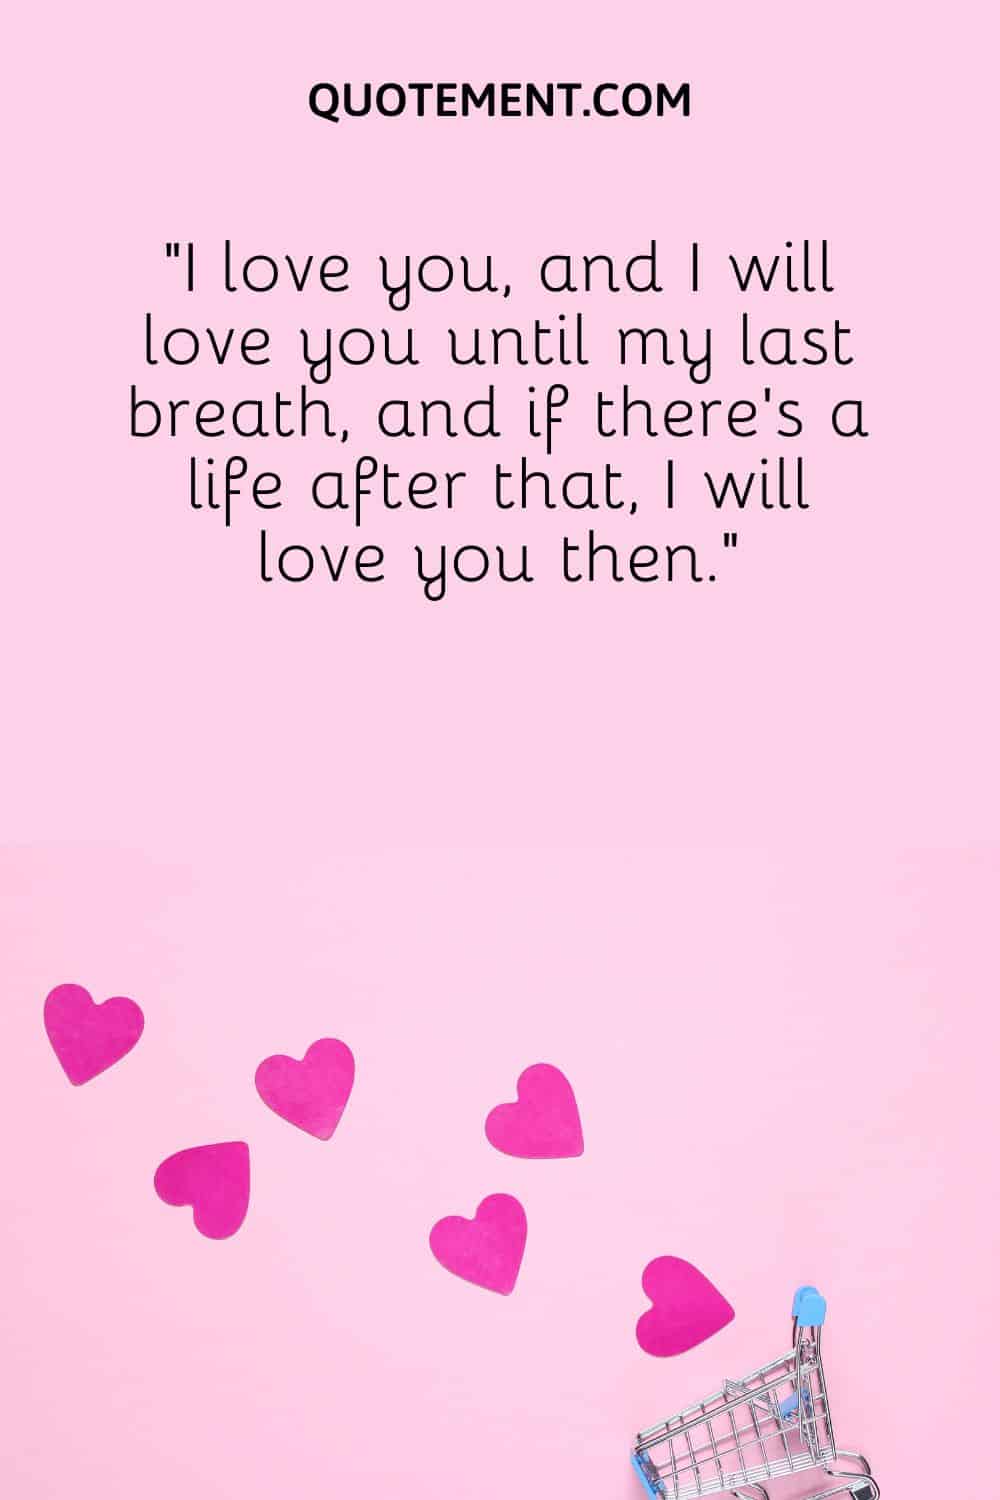 “I love you, and I will love you until my last breath, and if there’s a life after that, I will love you then.”